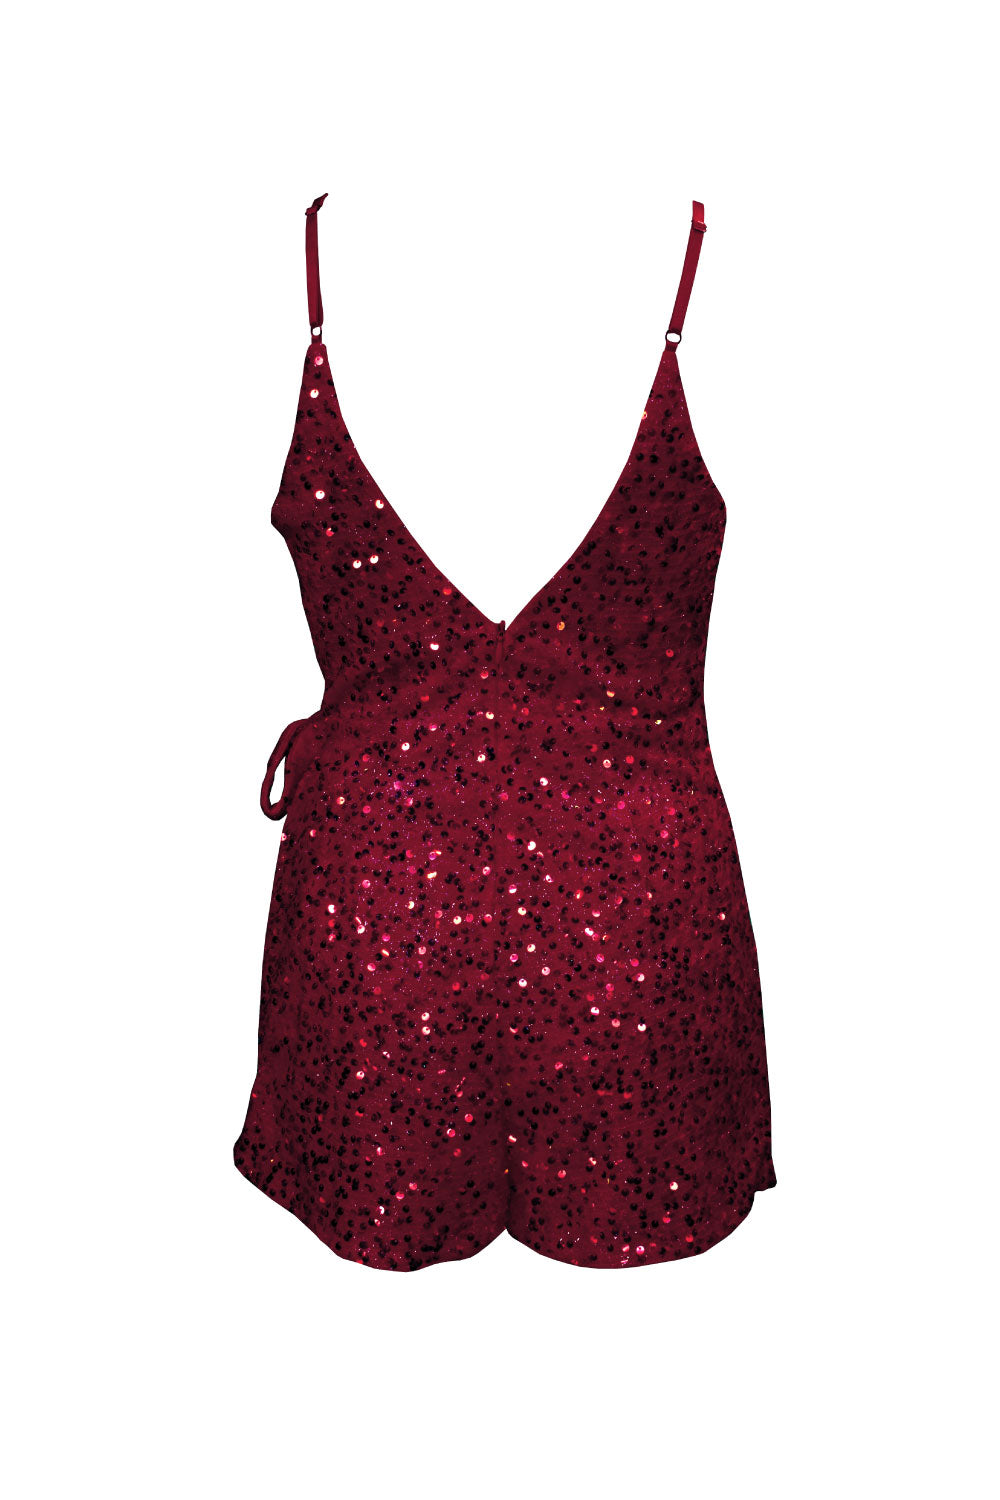 Image of the back of Luxxel's Sequin Wrap Tie-Up Romper in Red.